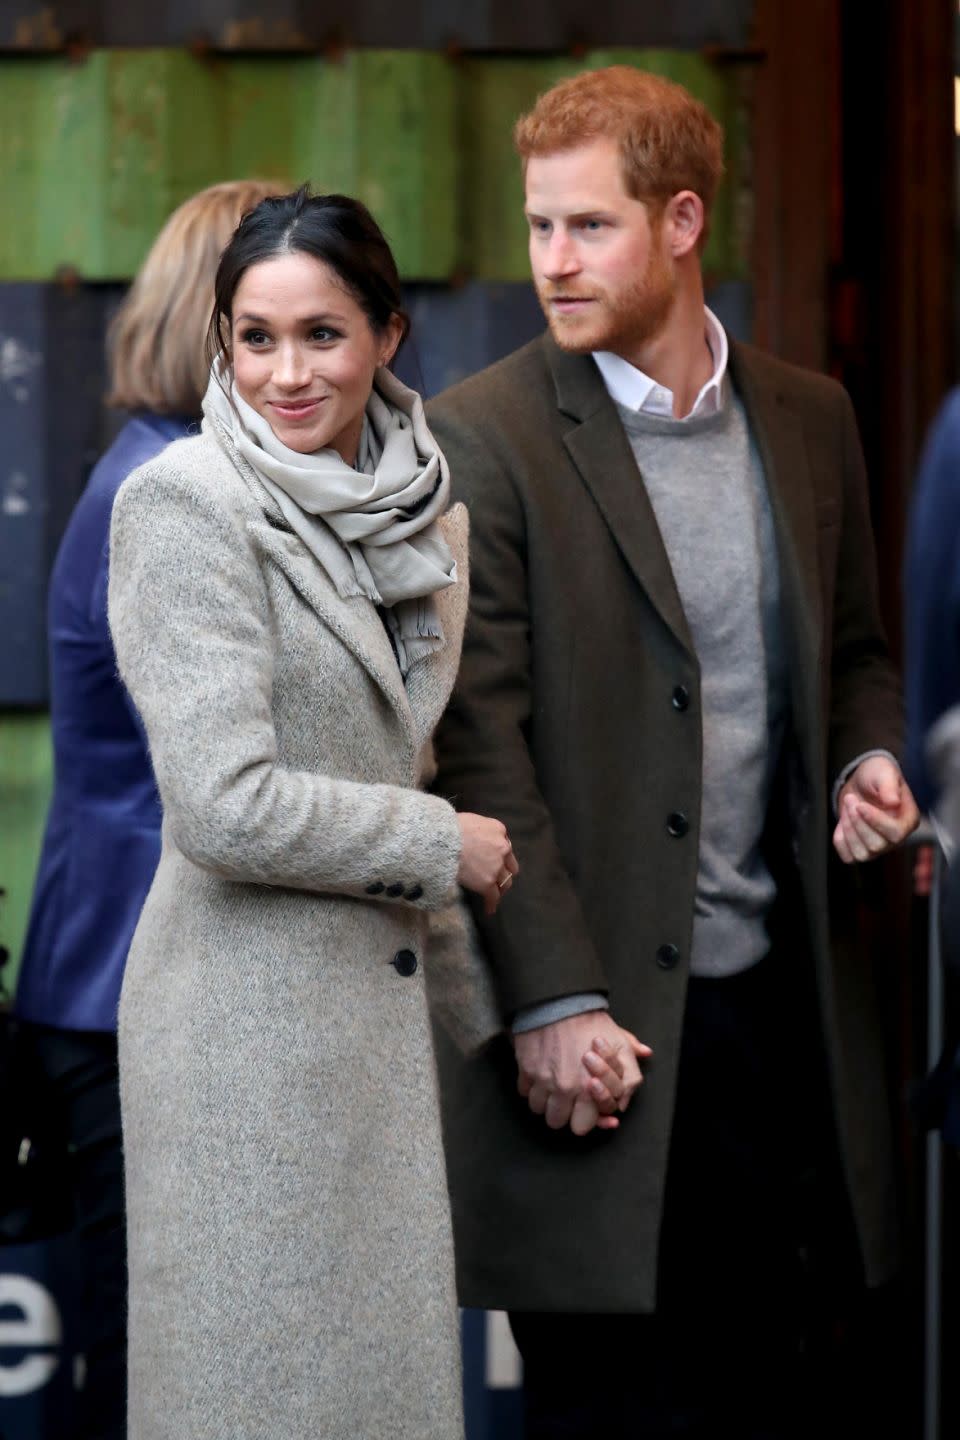 Harry and Meghan are due to tie the knot on May 19th. Photo: Getty Images